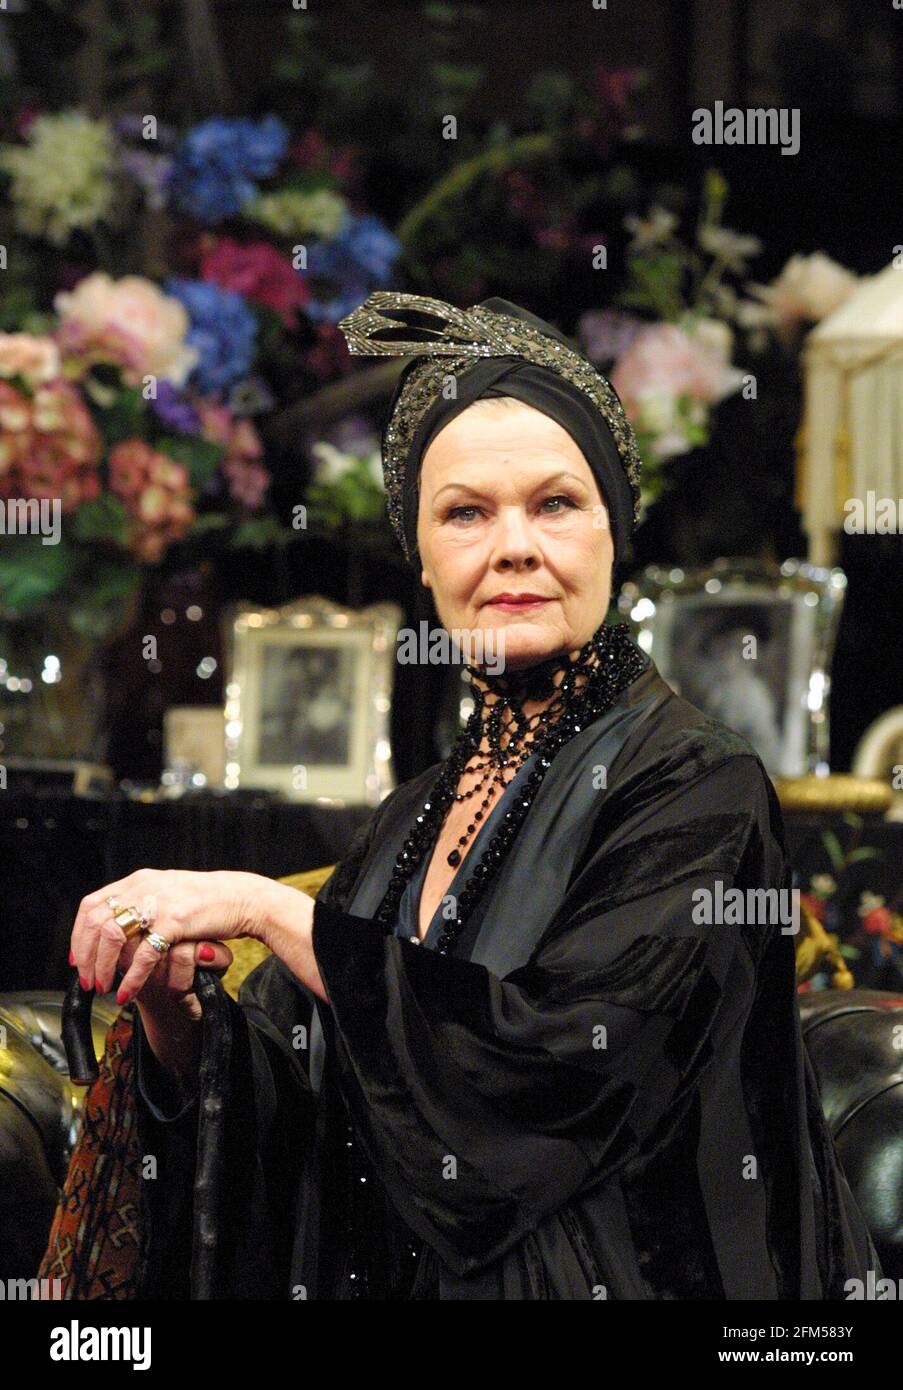 Judi Dench (Fanny Cavendish) in THE ROYAL FAMILY by George S. Kaufman & Edna Ferber at the Theatre Royal Haymarket, London SW1  01/11/2001  design: Anthony Ward  lighting: Jon Buswell  director: Peter Hall Stock Photo